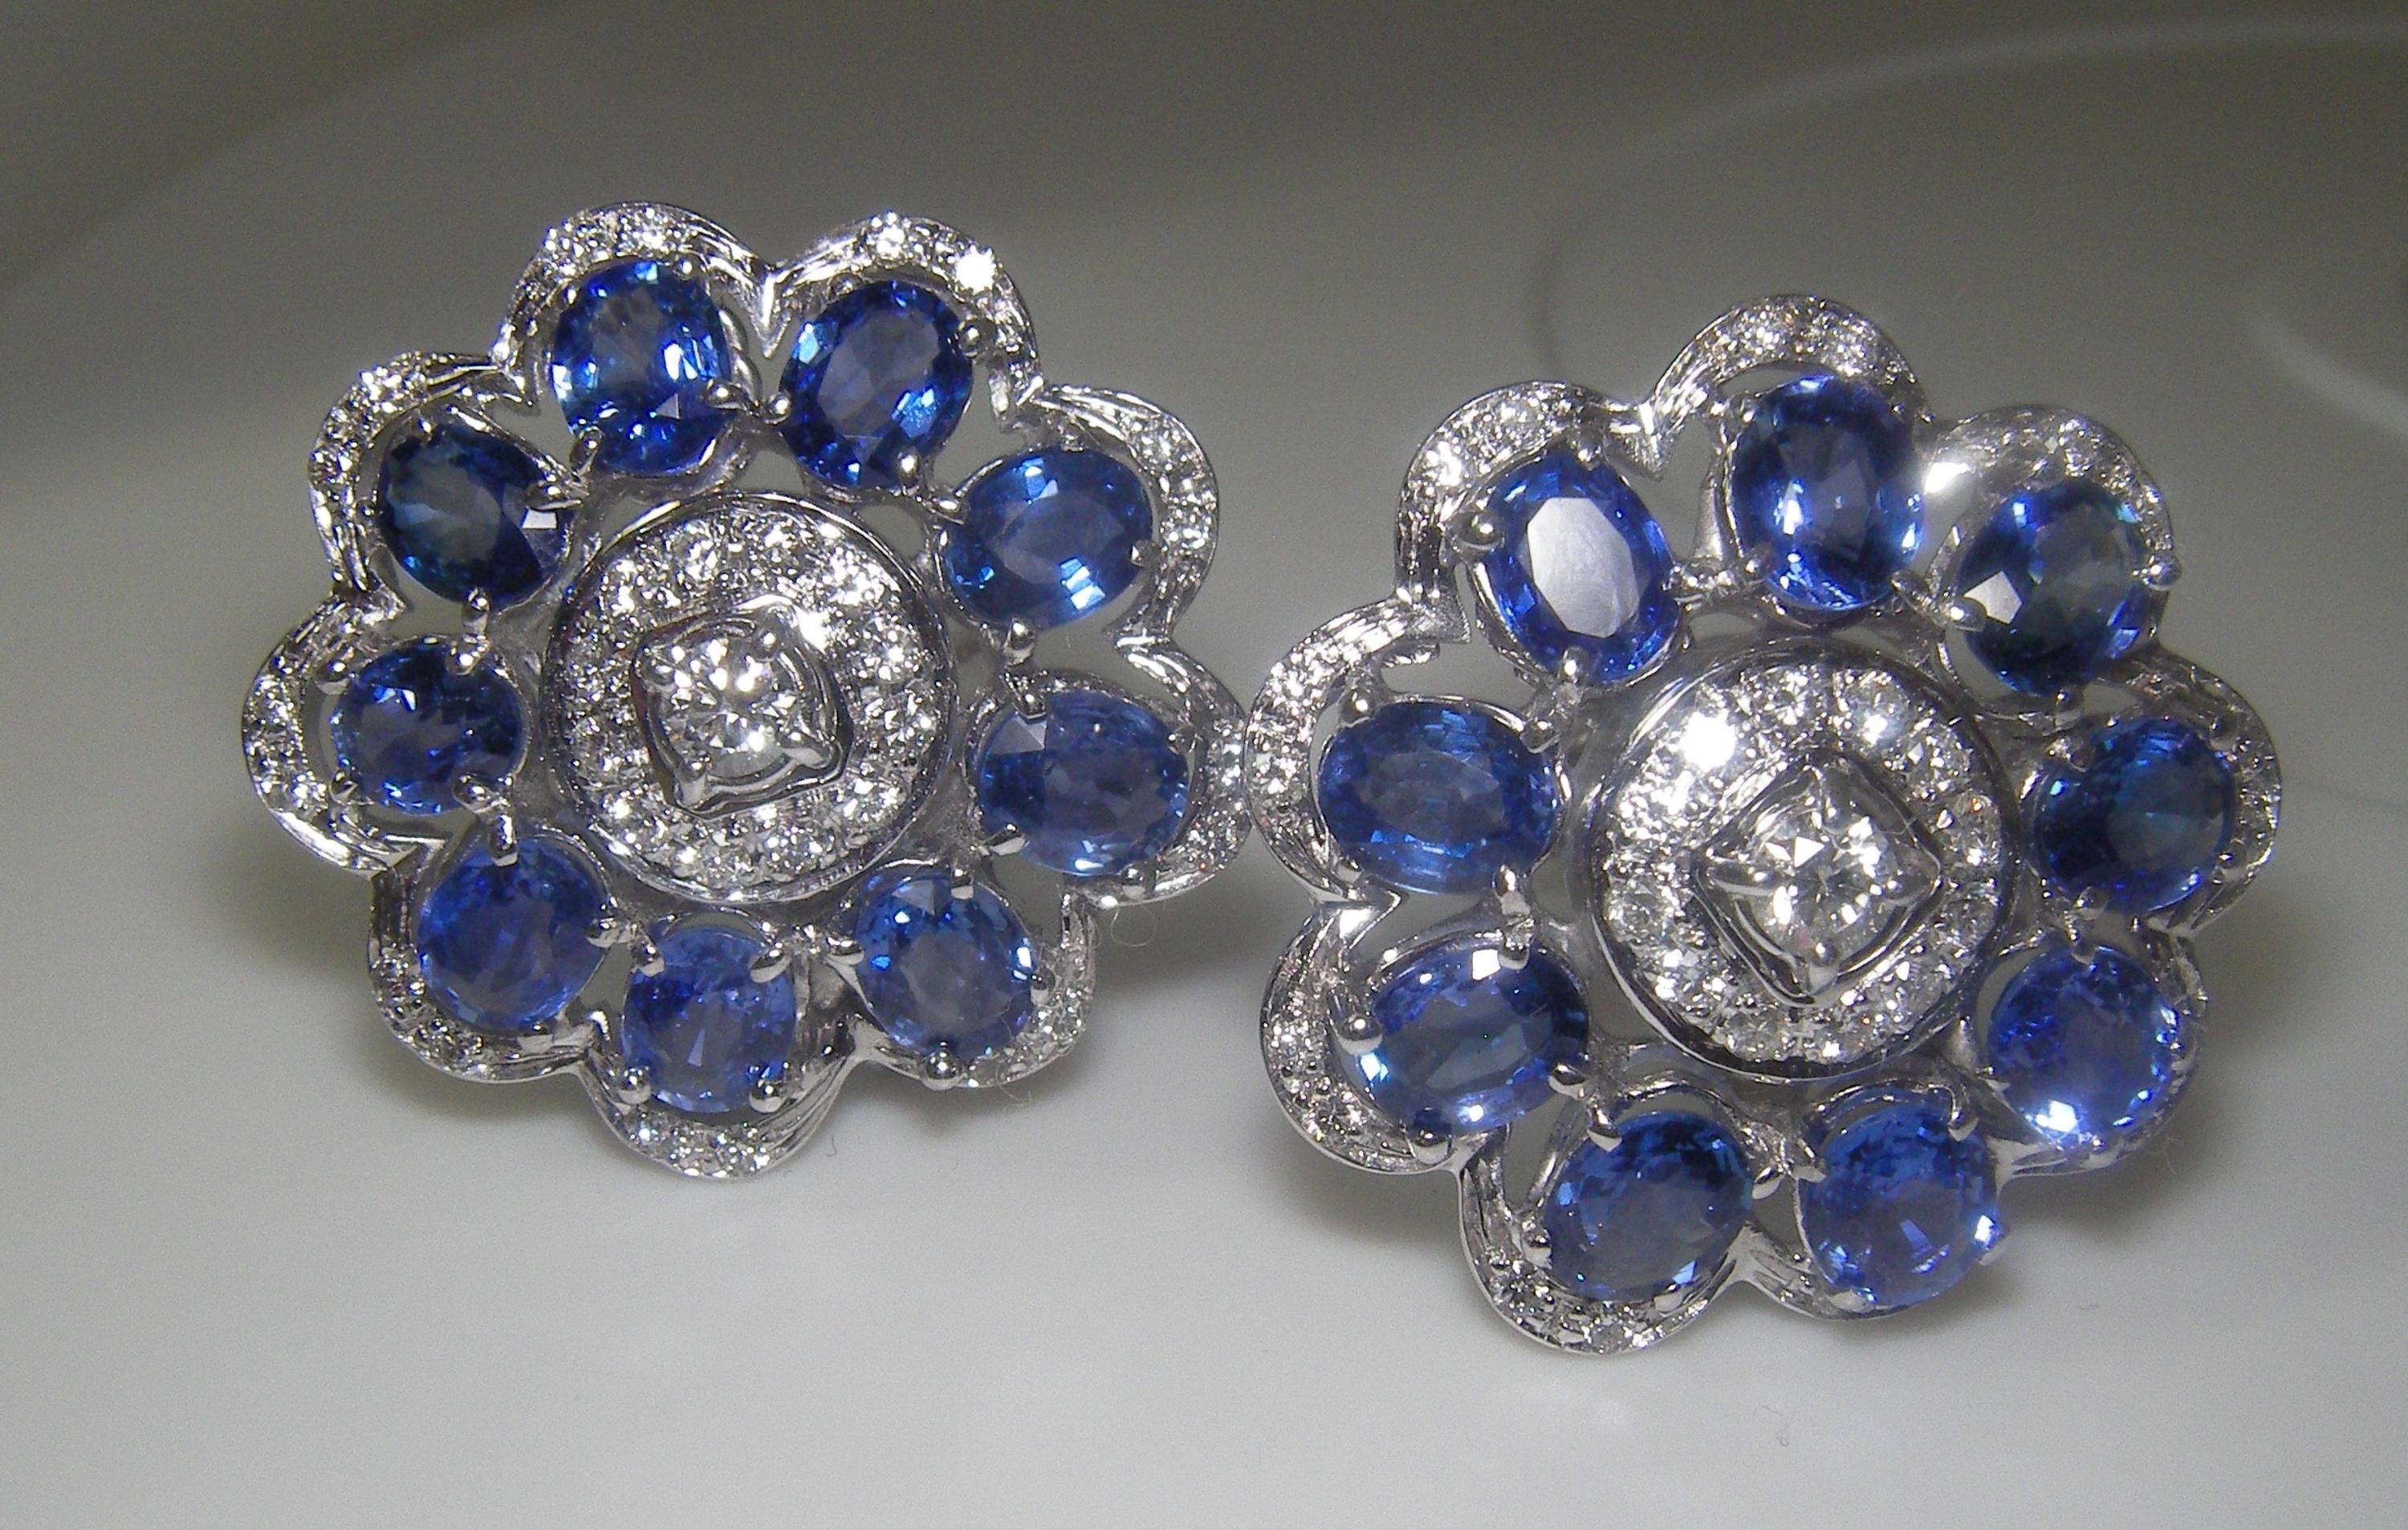 18 Karat White Gold Diamond and Sapphire  Earrings

62 Diamonds 0,93 Carat H SI
18 Sapphires  8,32 Carat


Founded in 1974, Gianni Lazzaro is a family-owned jewelry company based out of Düsseldorf, Germany.
Although rooted in Germany, Gianni